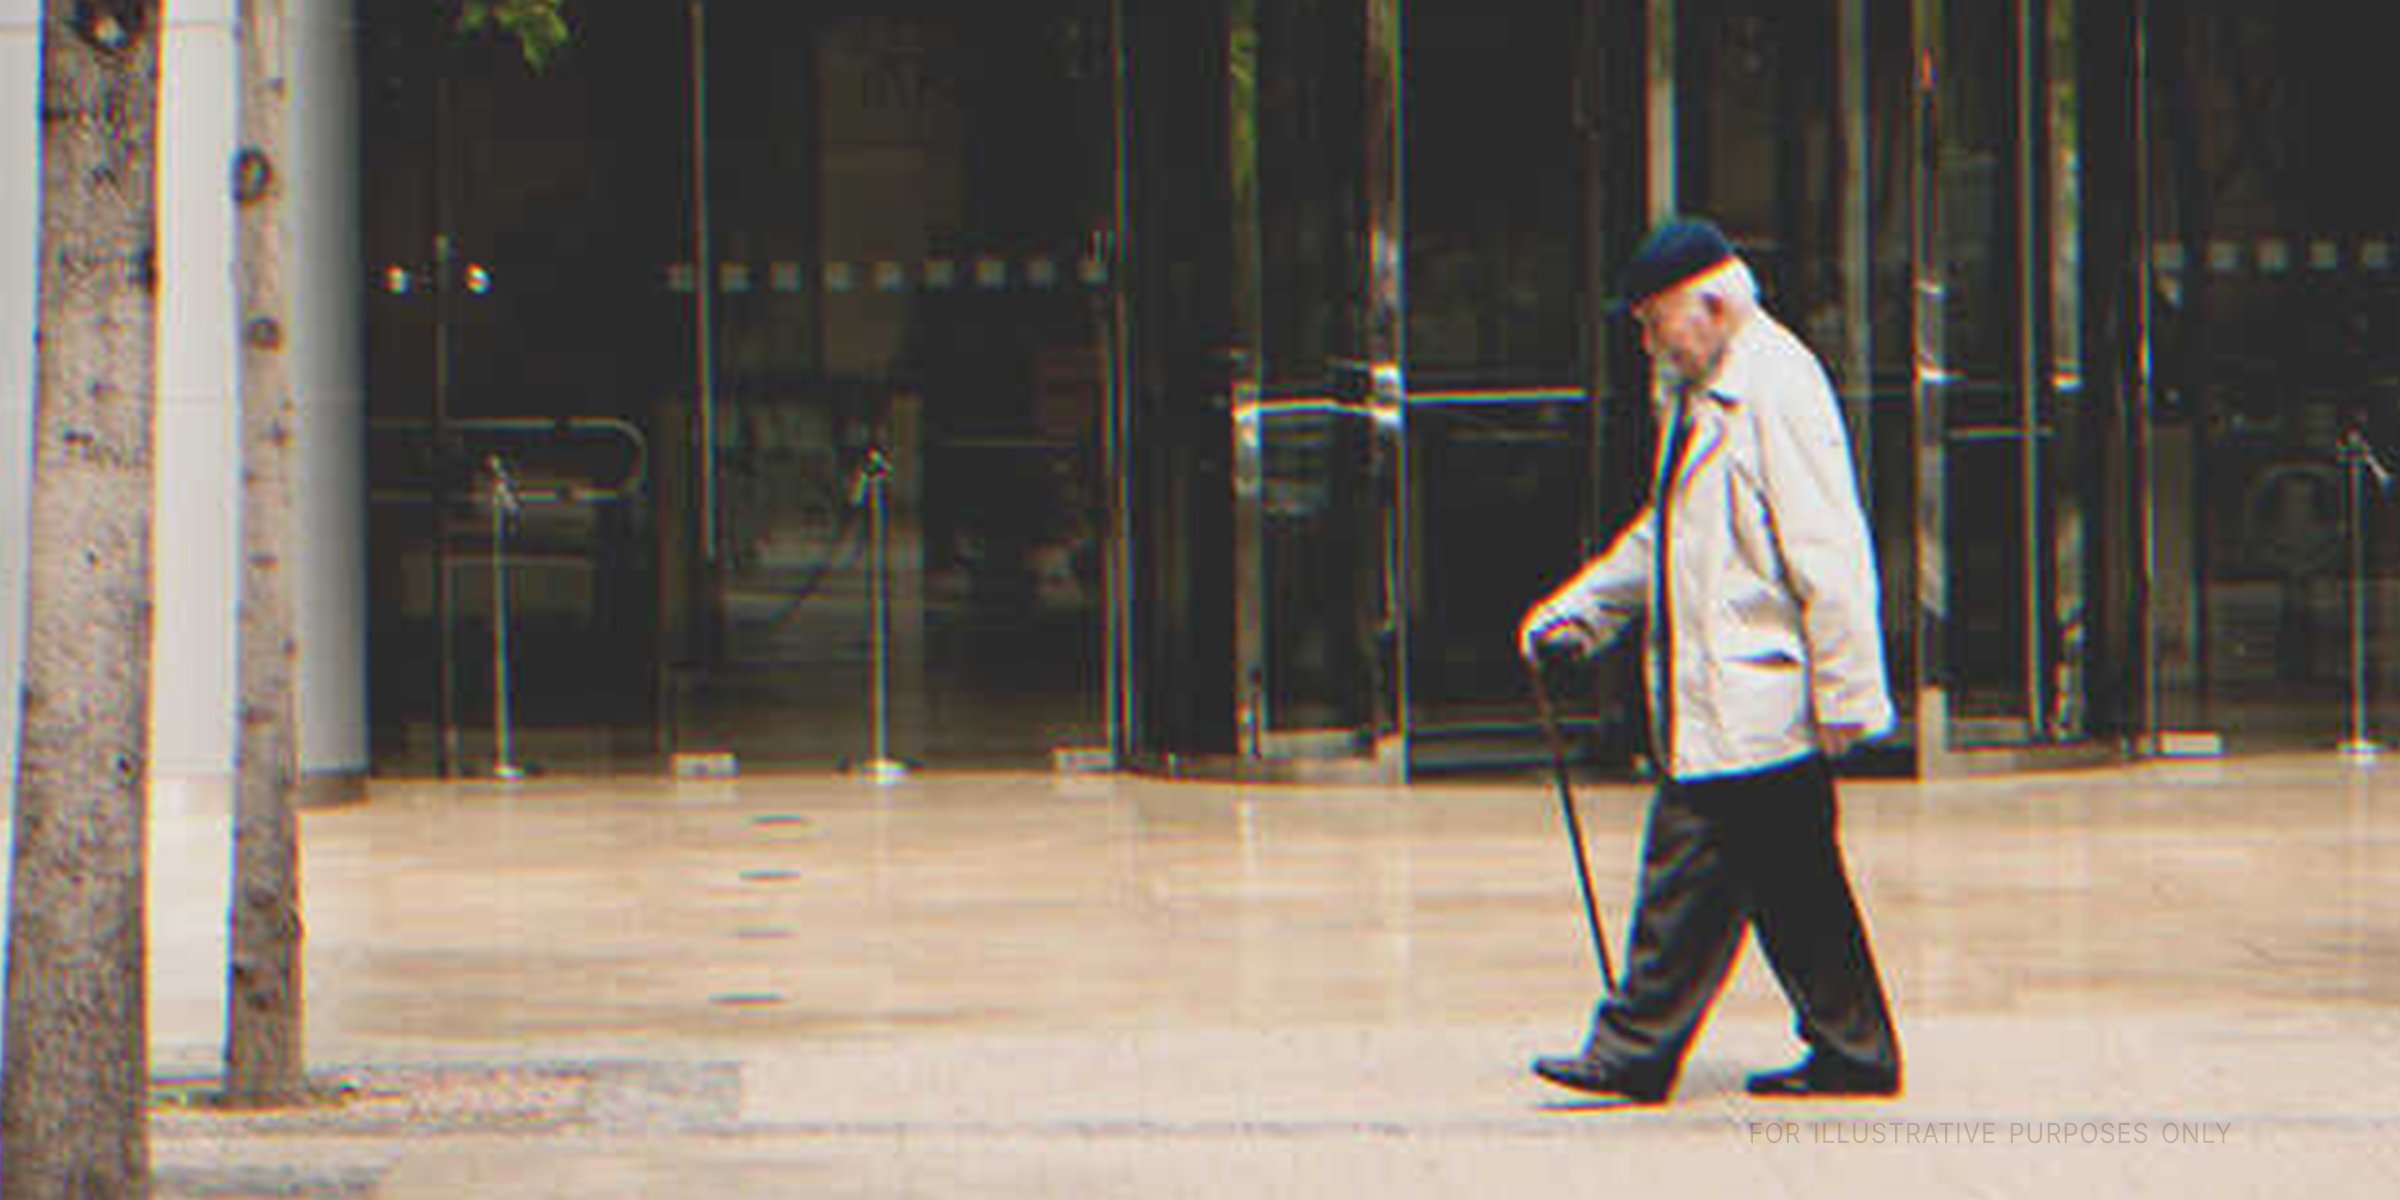 Old Man Walking With A Stick | Source: Shutterstock